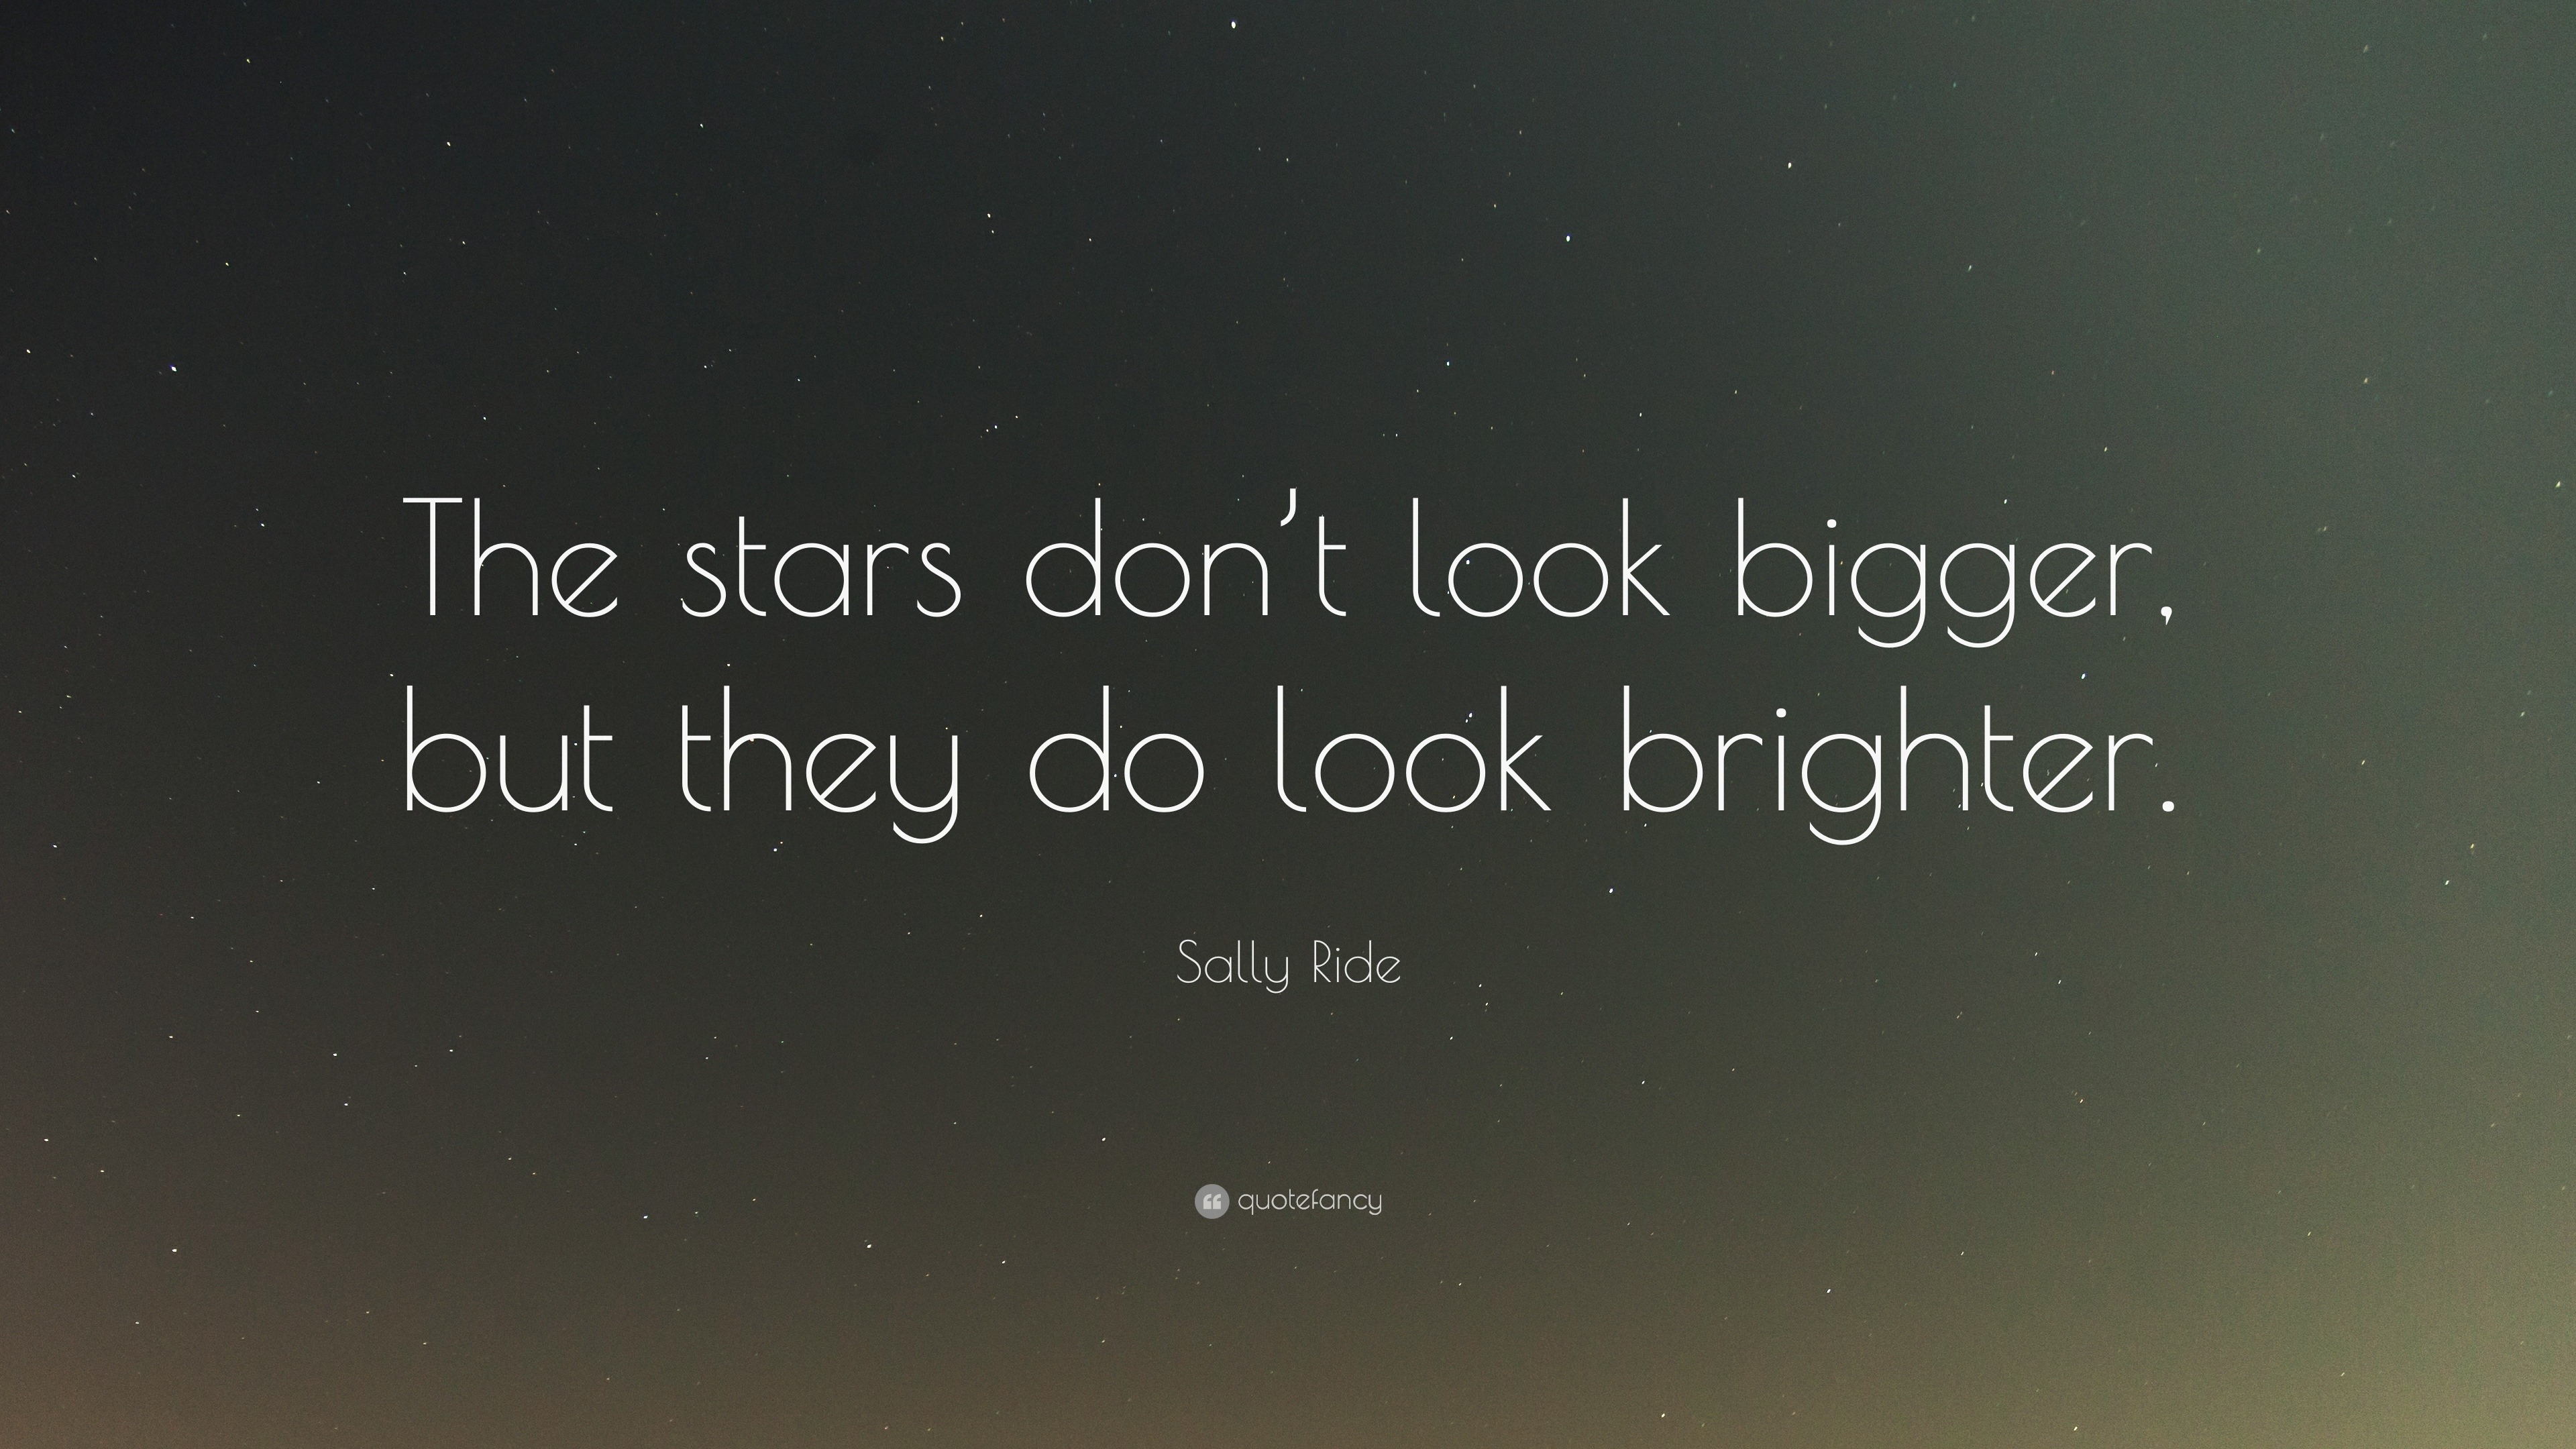 sally ride quotes about being a role model